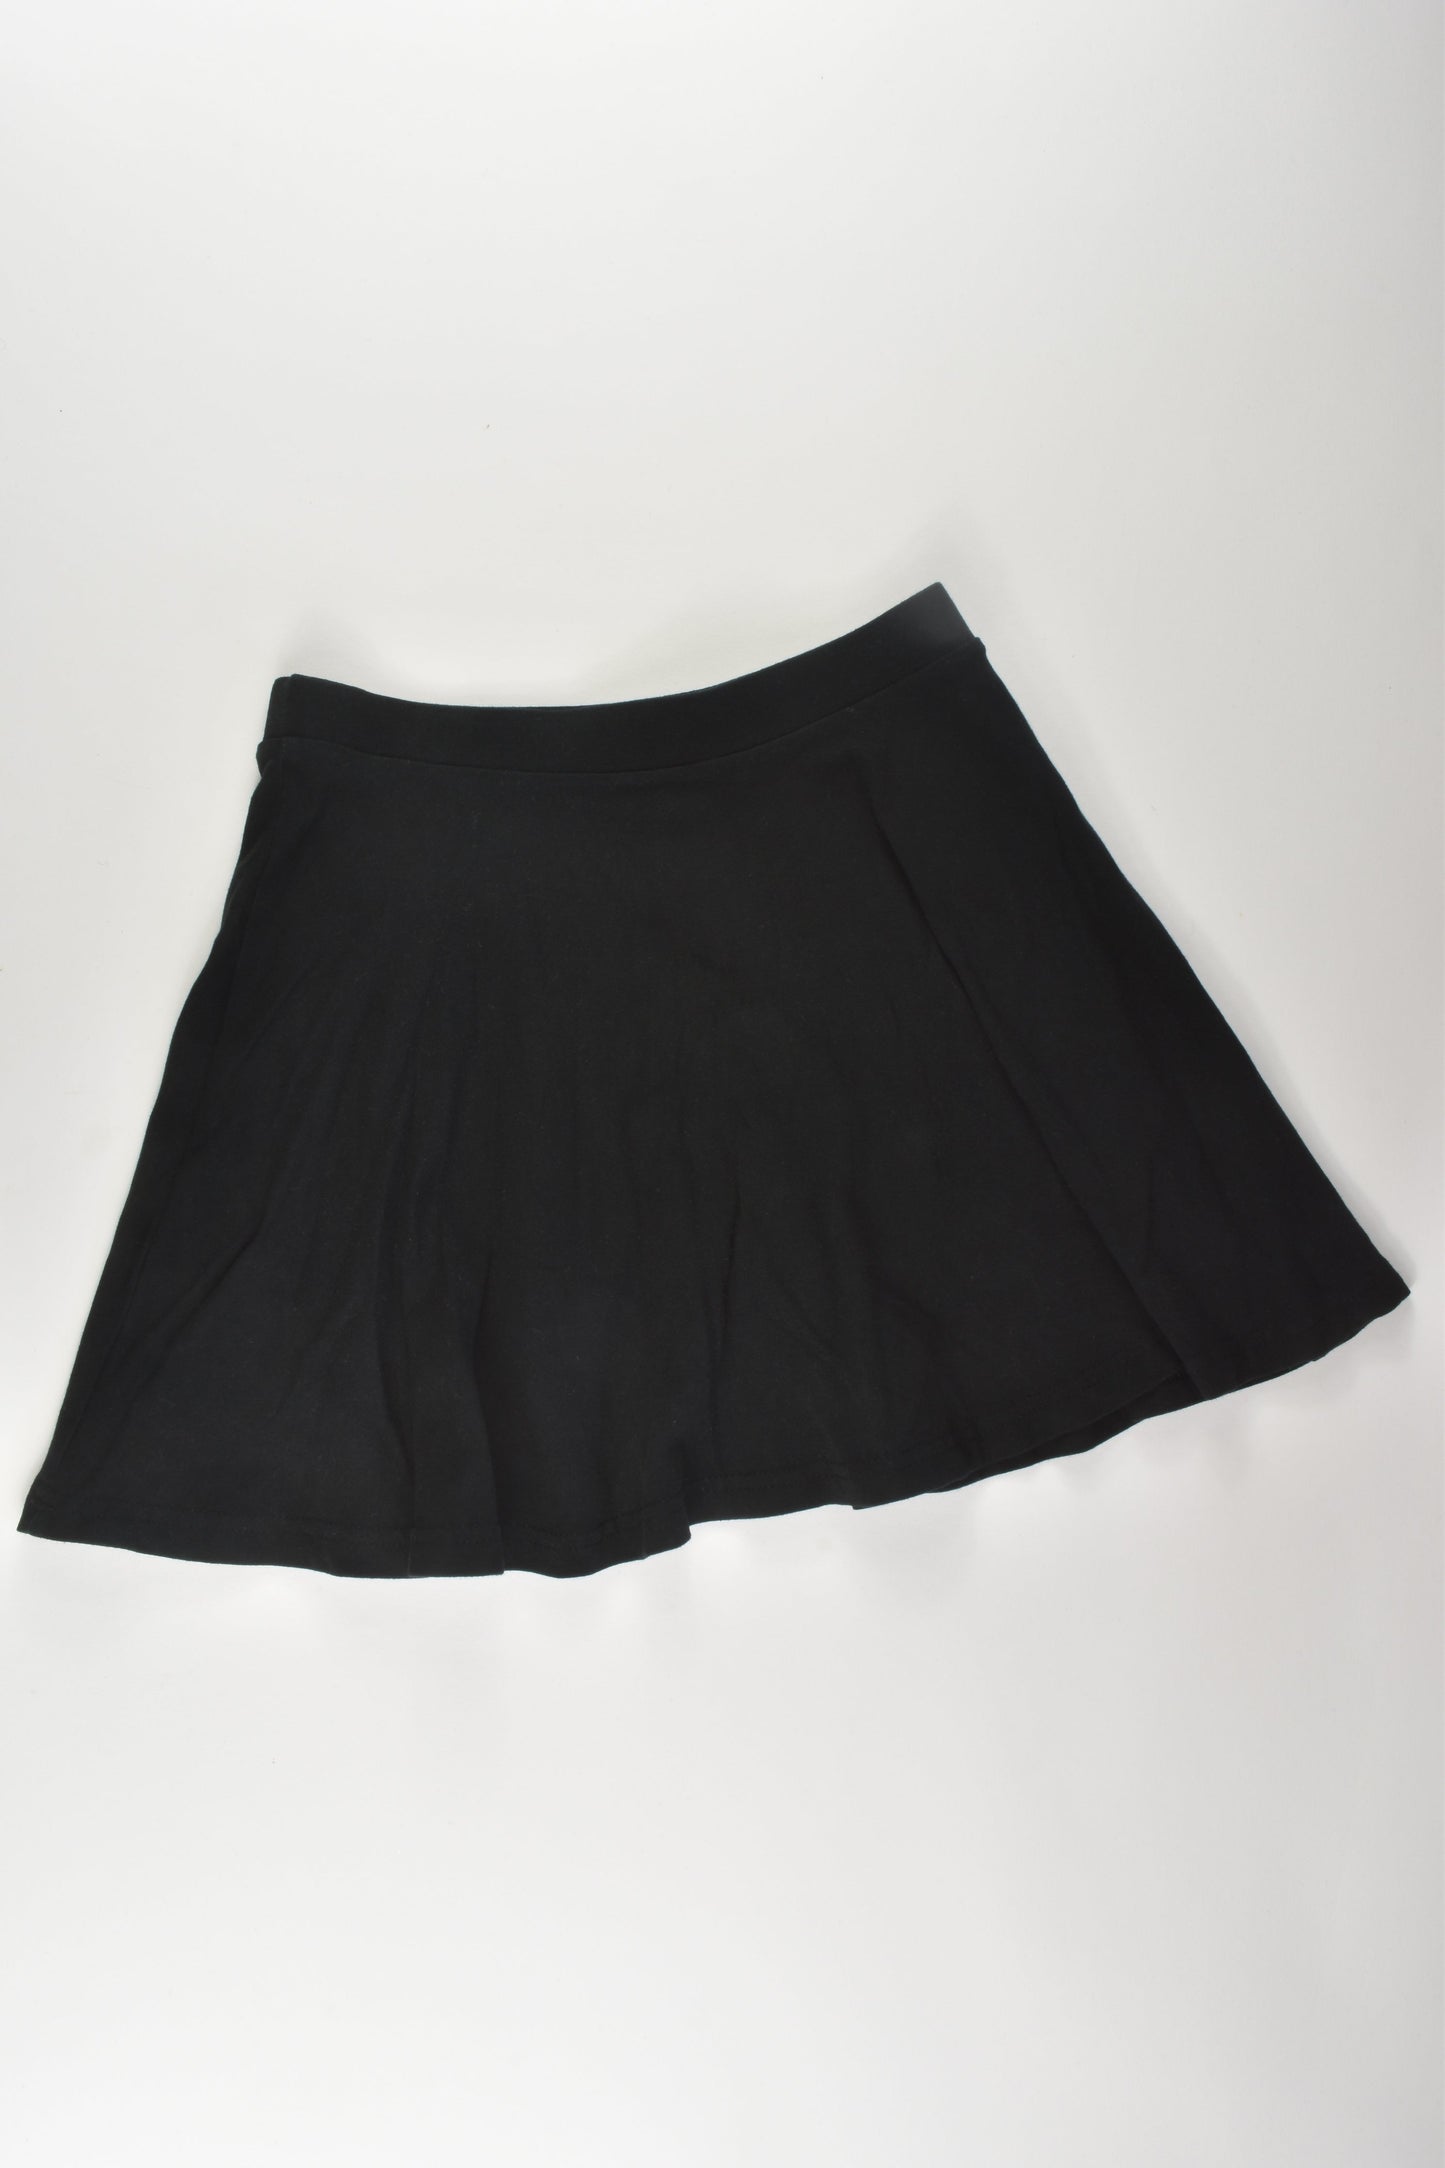 Target Size 10 Skirt with Shorts Underneath